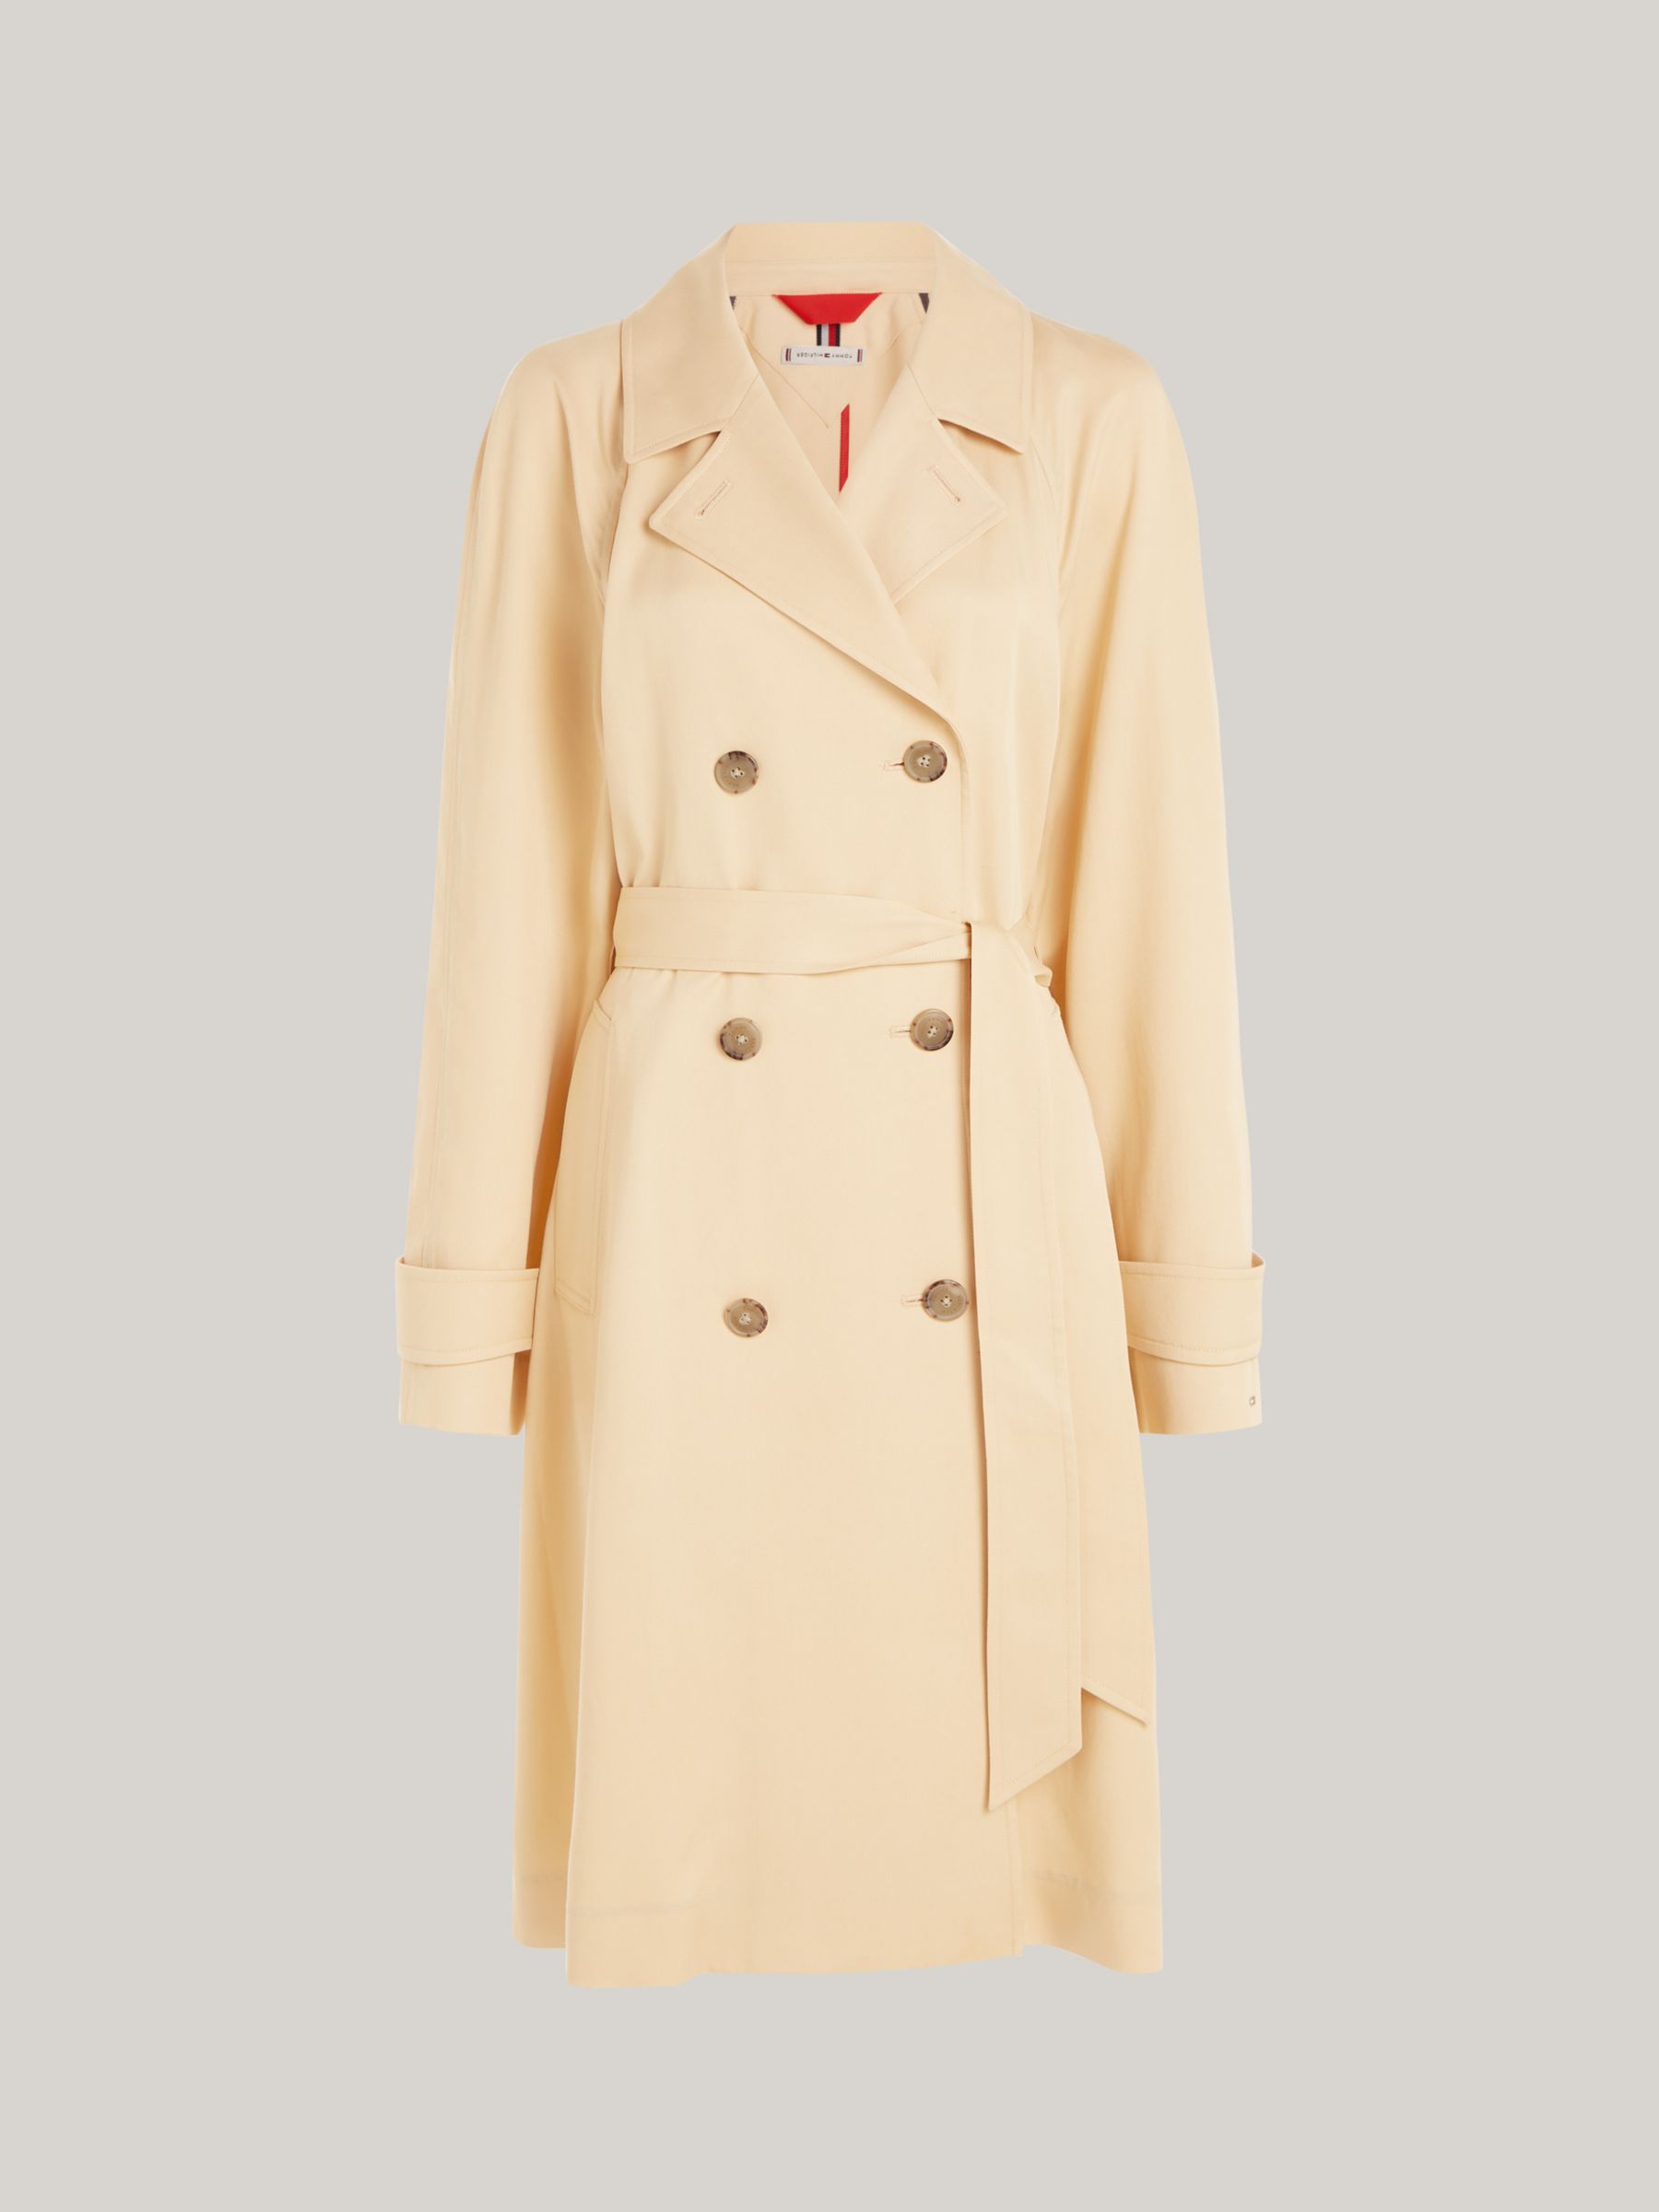 Buy Tommy Hilfiger Fluid Double Breasted Trench Coat, Harvest Wheat Online at johnlewis.com